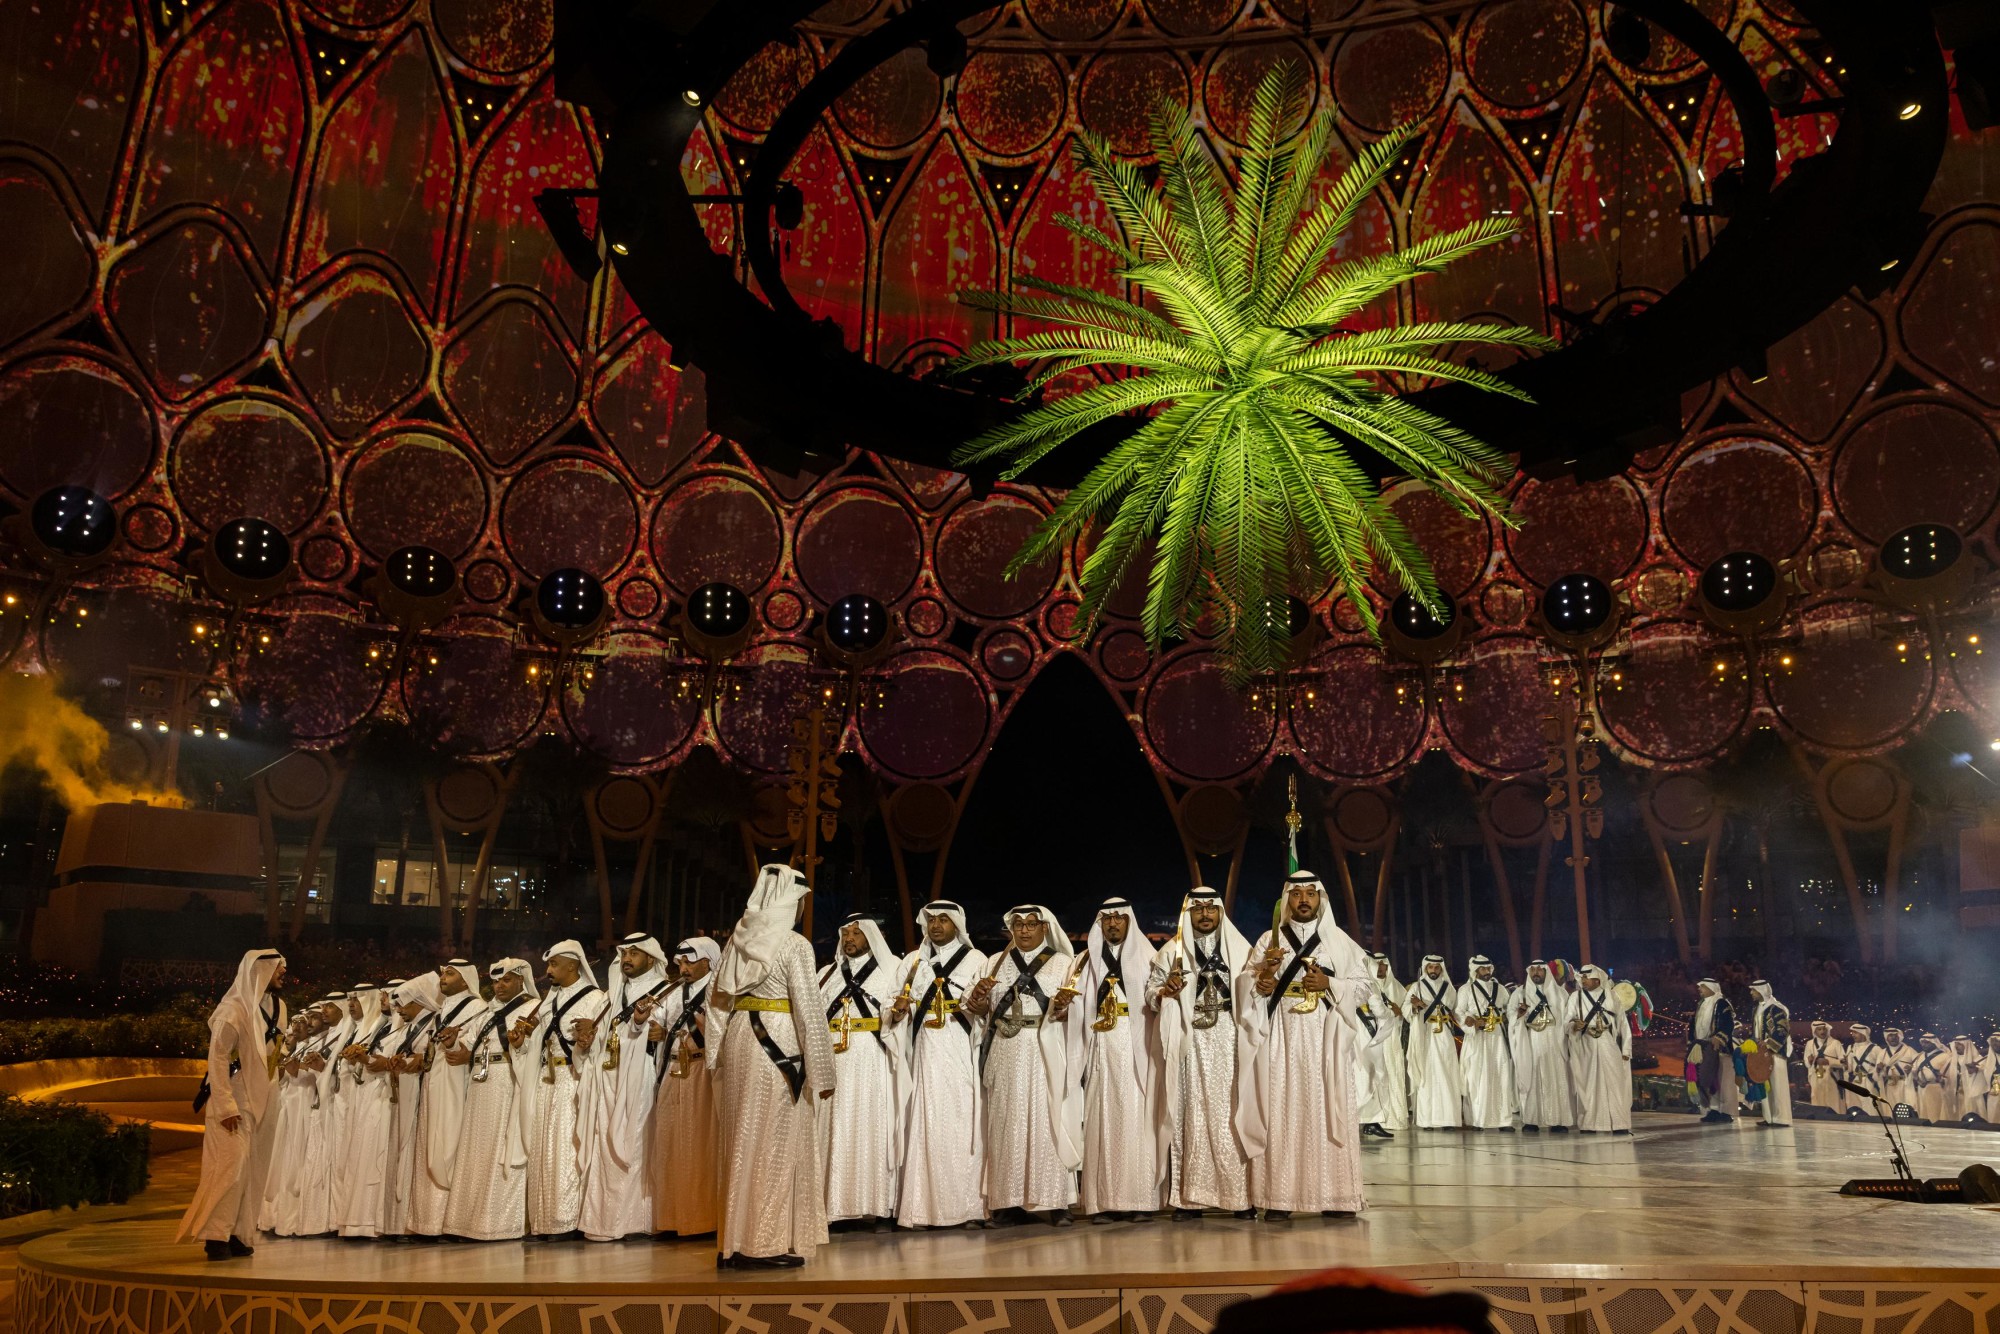 The Glory Musical Show at Al Wasl during the Kingdom of Saudi Arabia National Day m30466